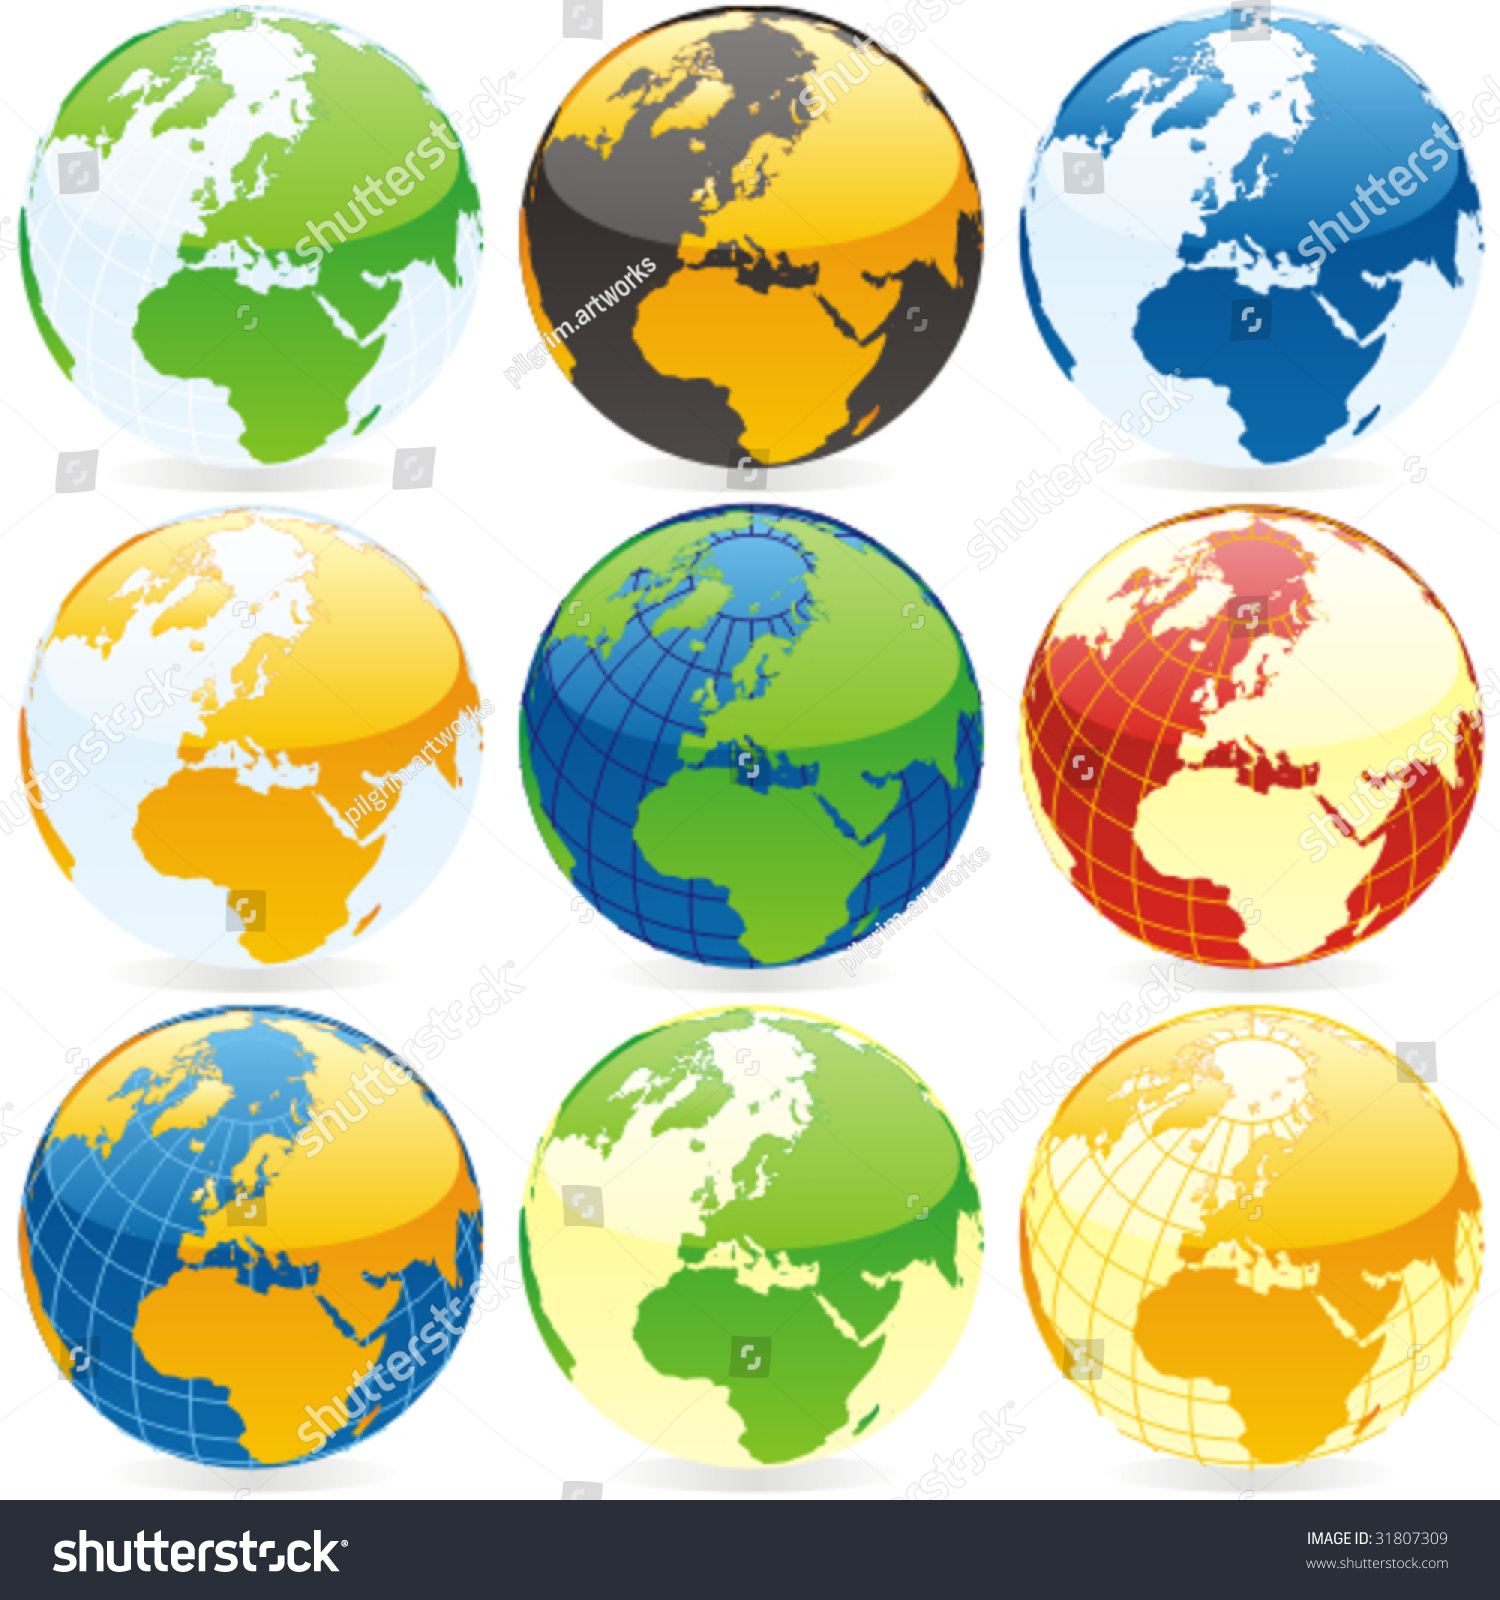 Vector Editable Colored Globes Stock Vector Royalty Free Shutterstock